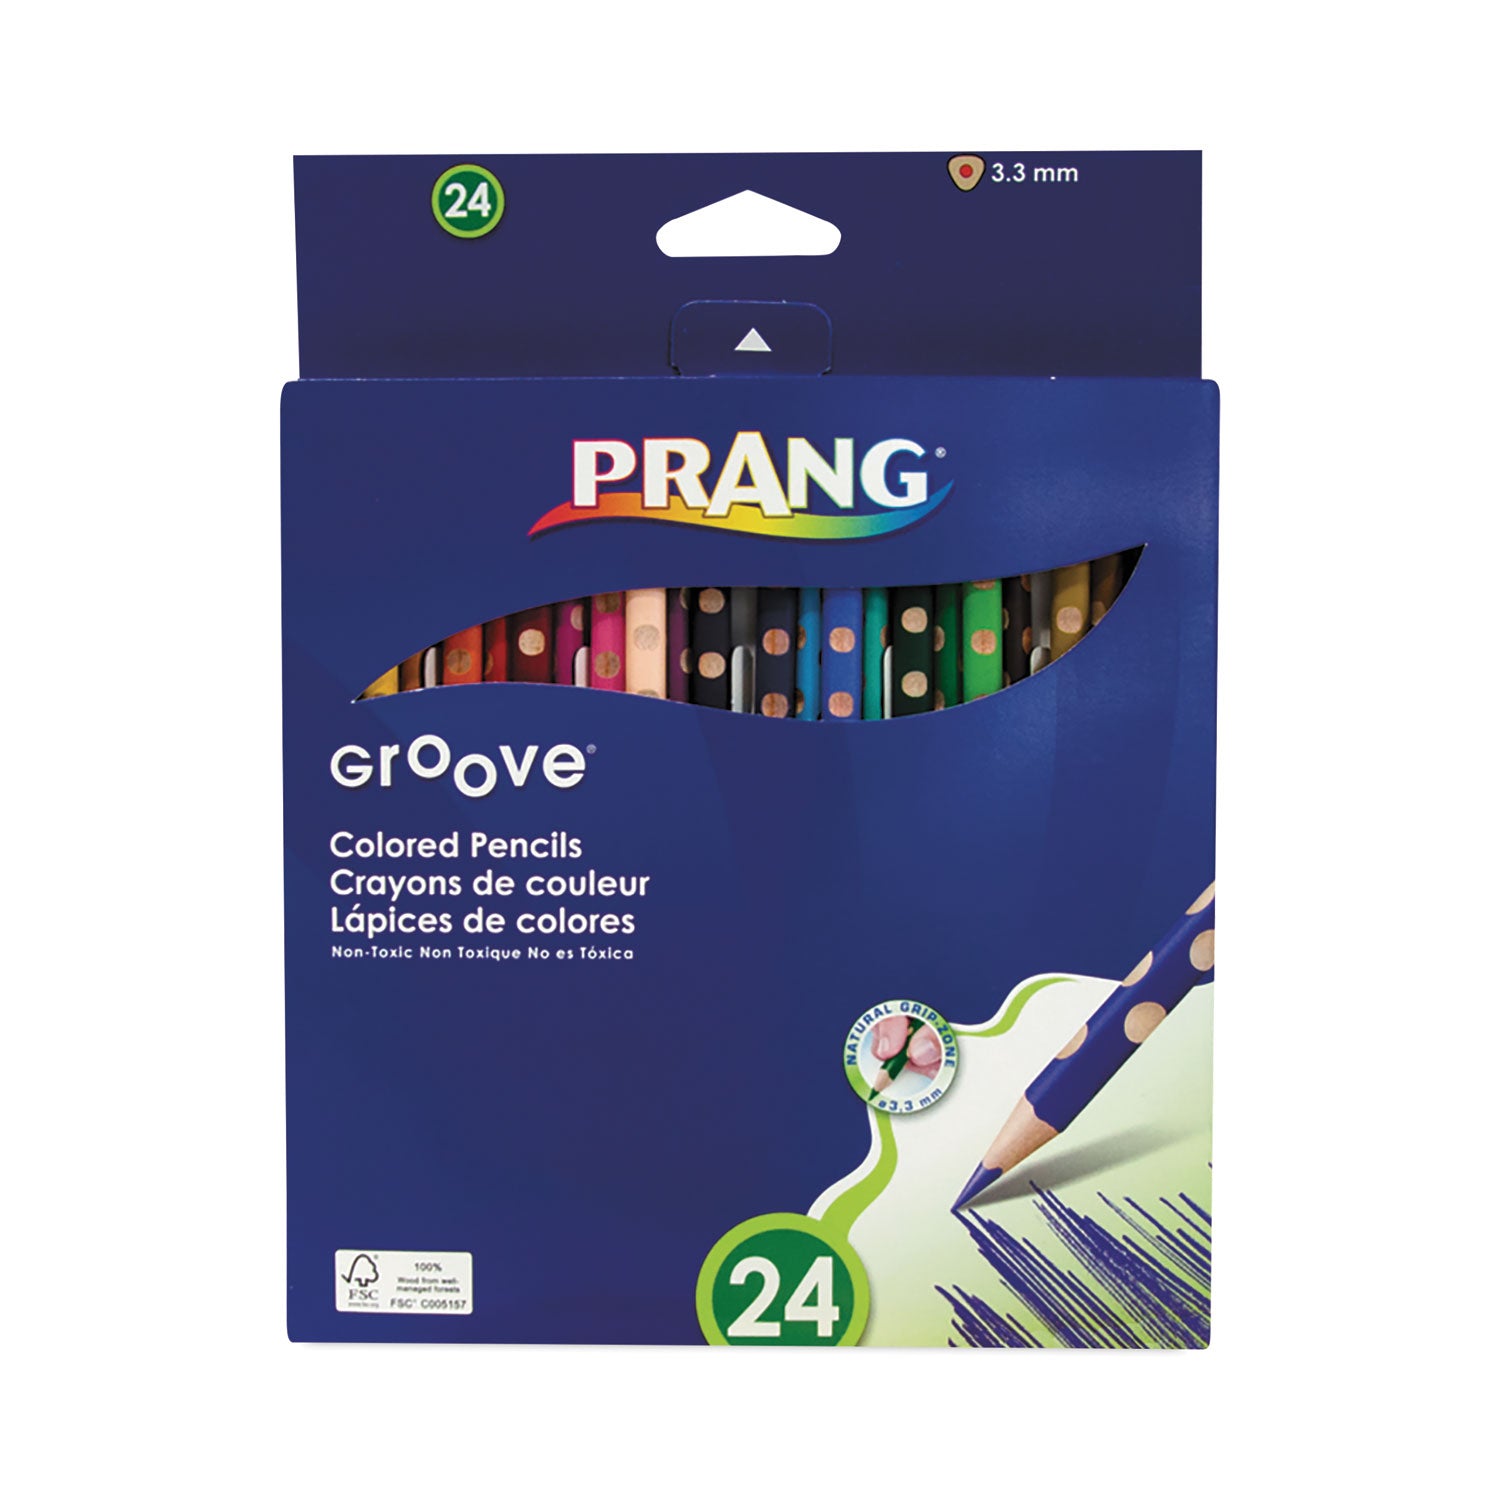 Groove Colored Pencils, 3.3 mm, 2B, Assorted Lead and Barrel Colors, 24/Pack - 